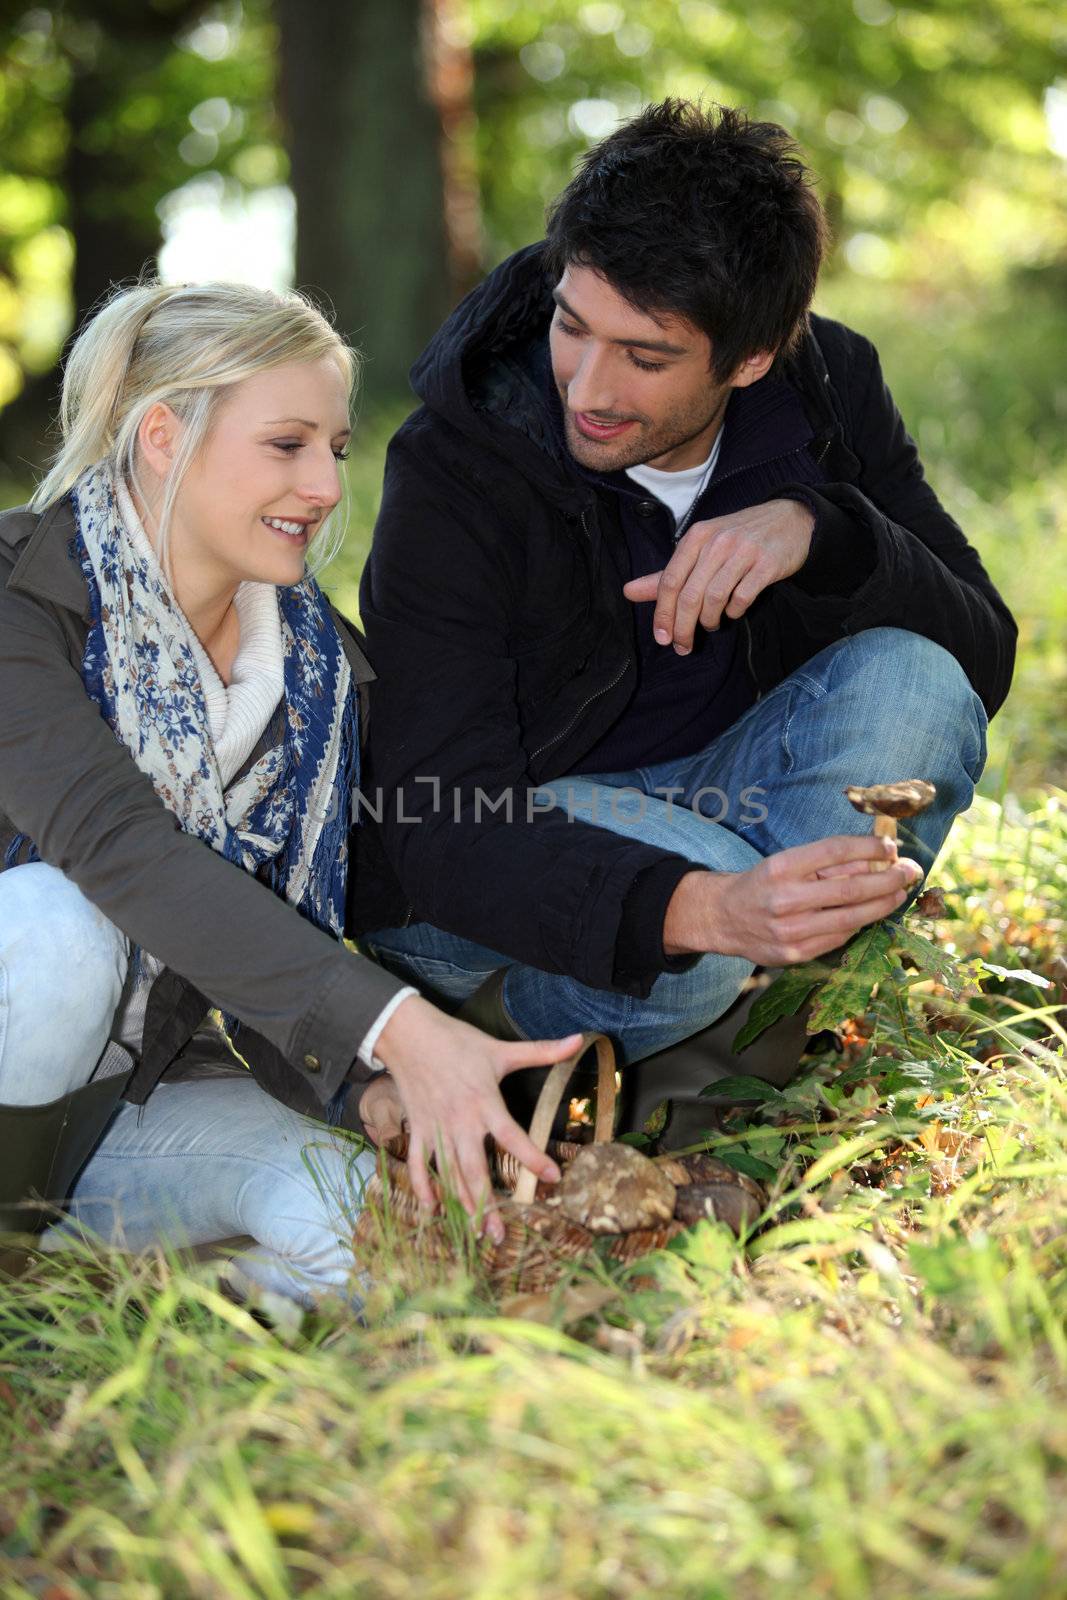 Couple gathering mushrooms in park by phovoir